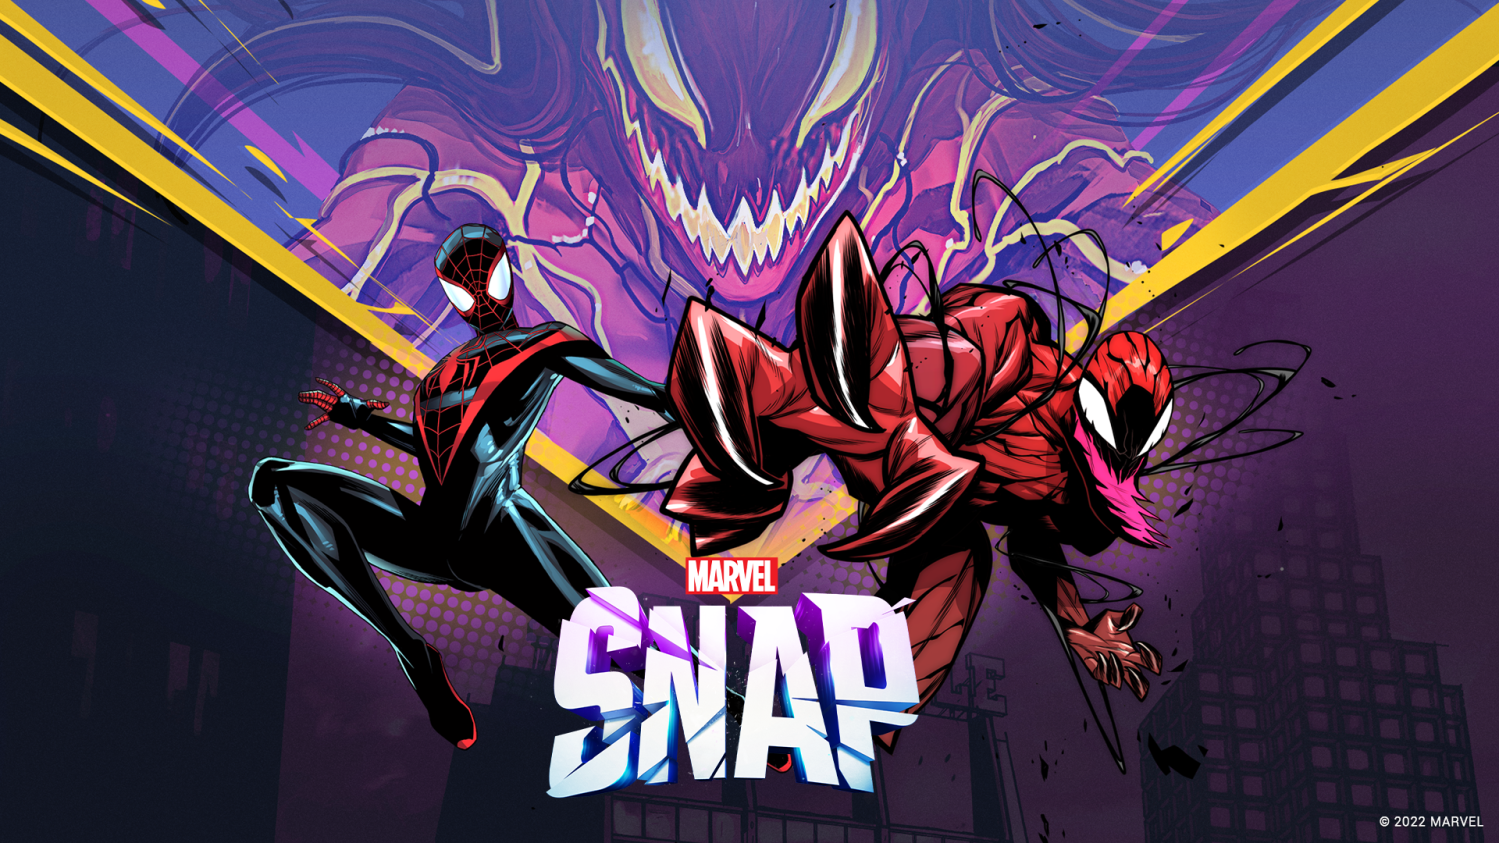 THESE NEW CARDS will BE INSANE! - MARVEL SNAP 